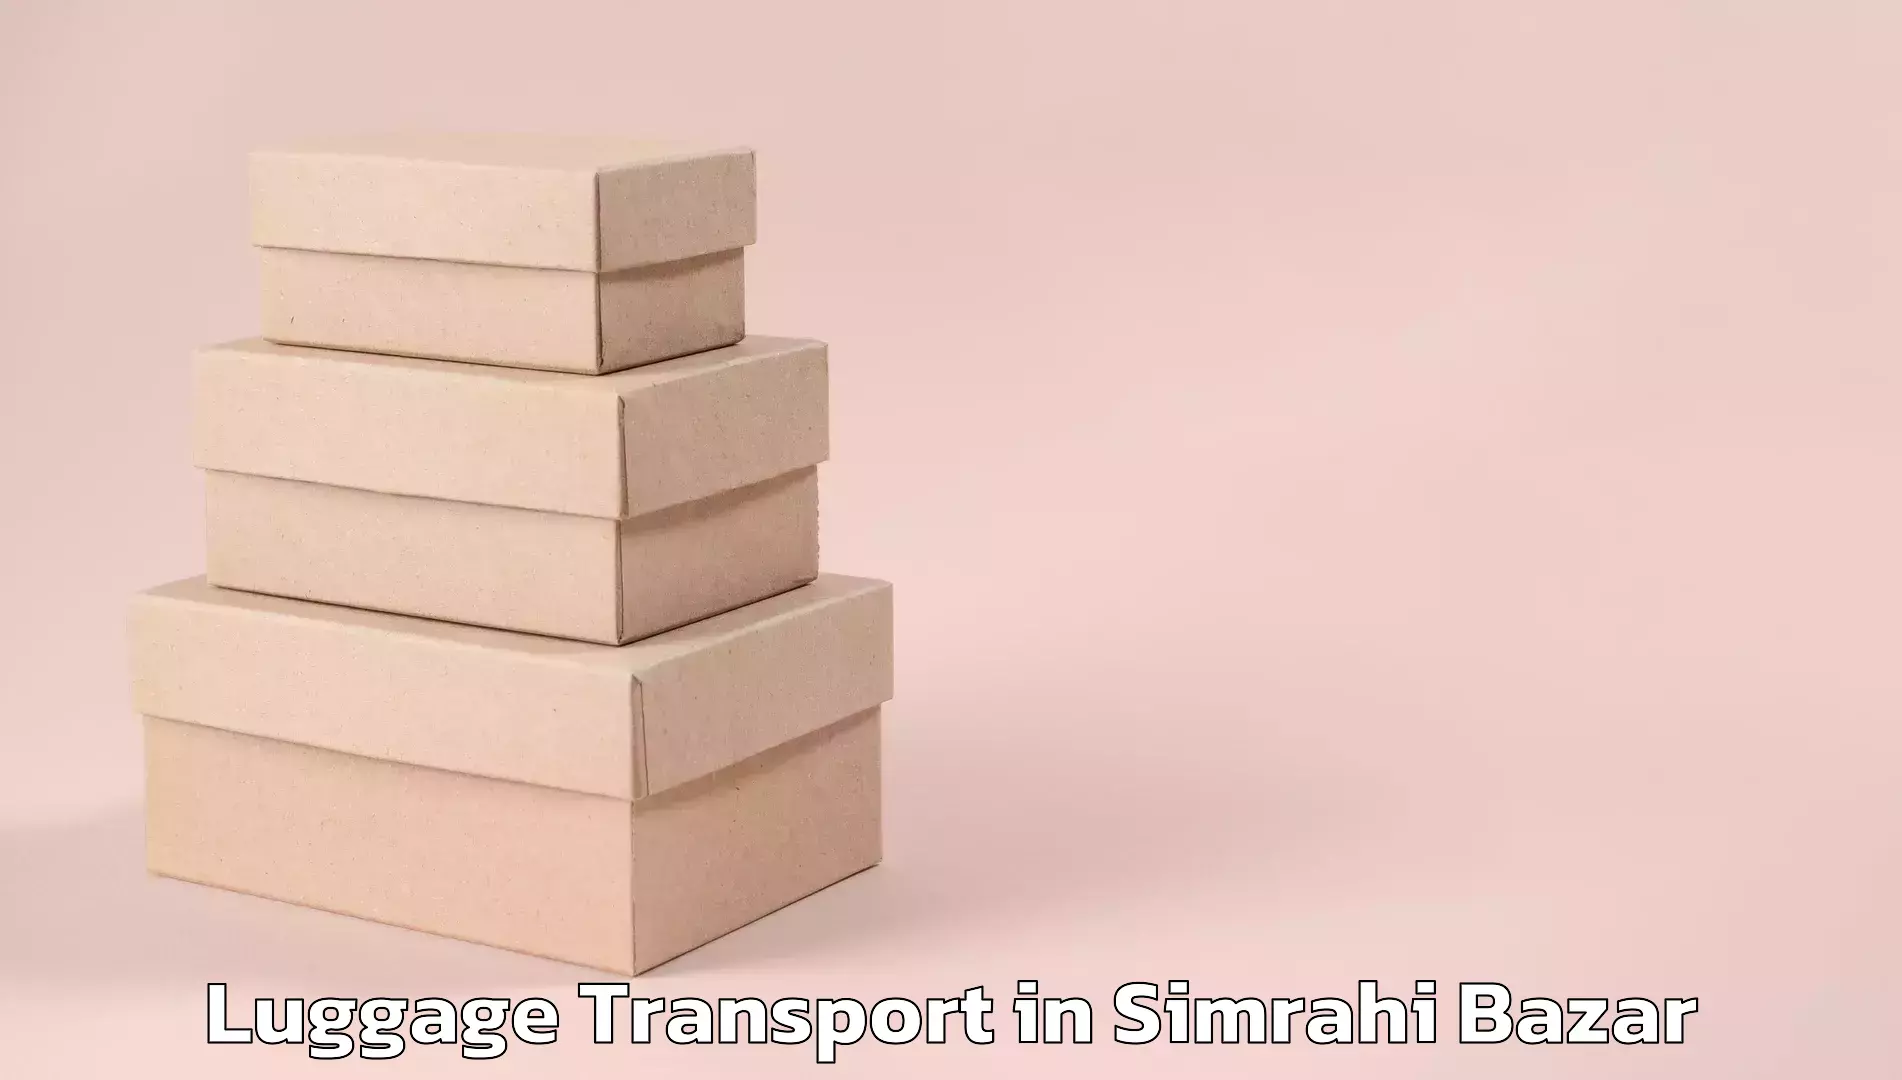 Luggage delivery optimization in Simrahi Bazar